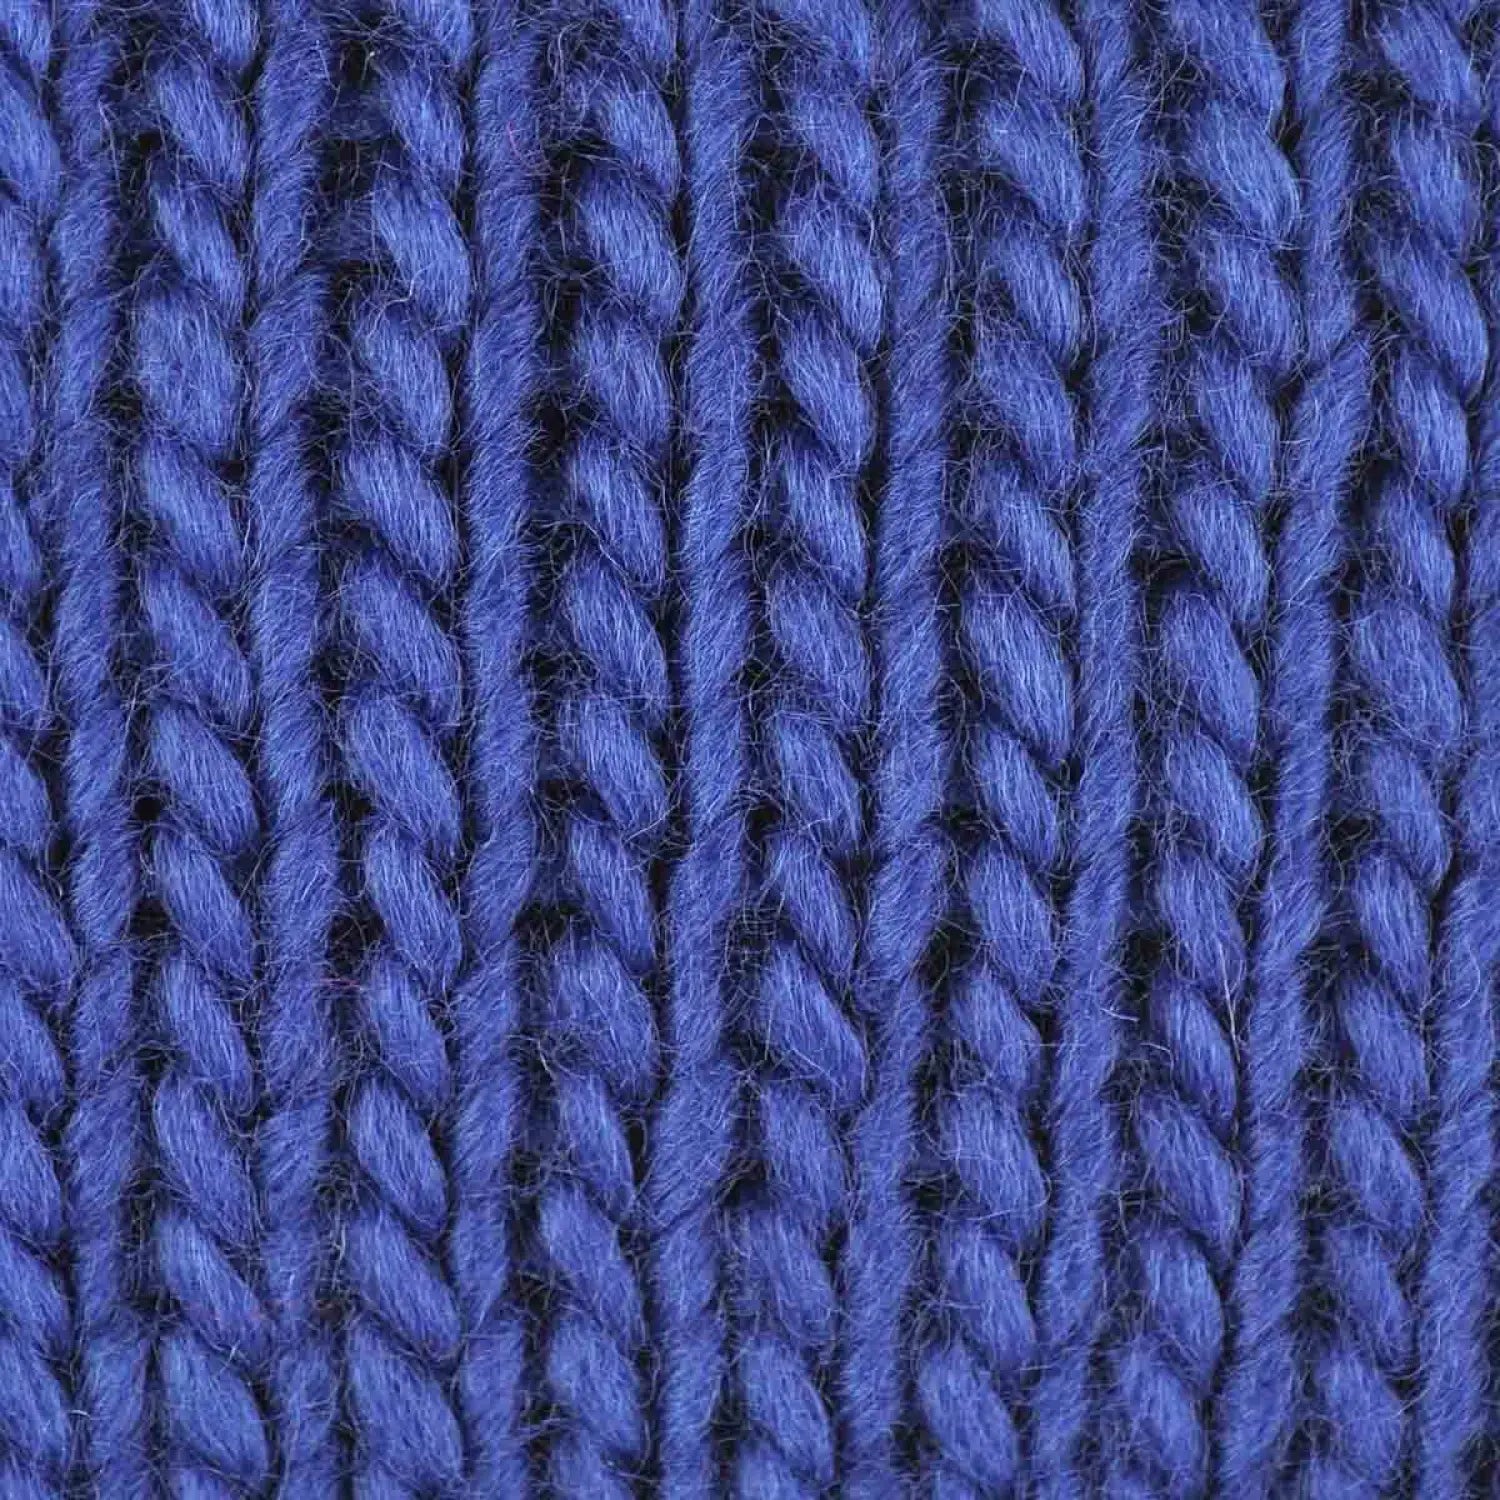 Blue wool texture of Bow-Detailed Knitted Headband for Autumn & Winter.